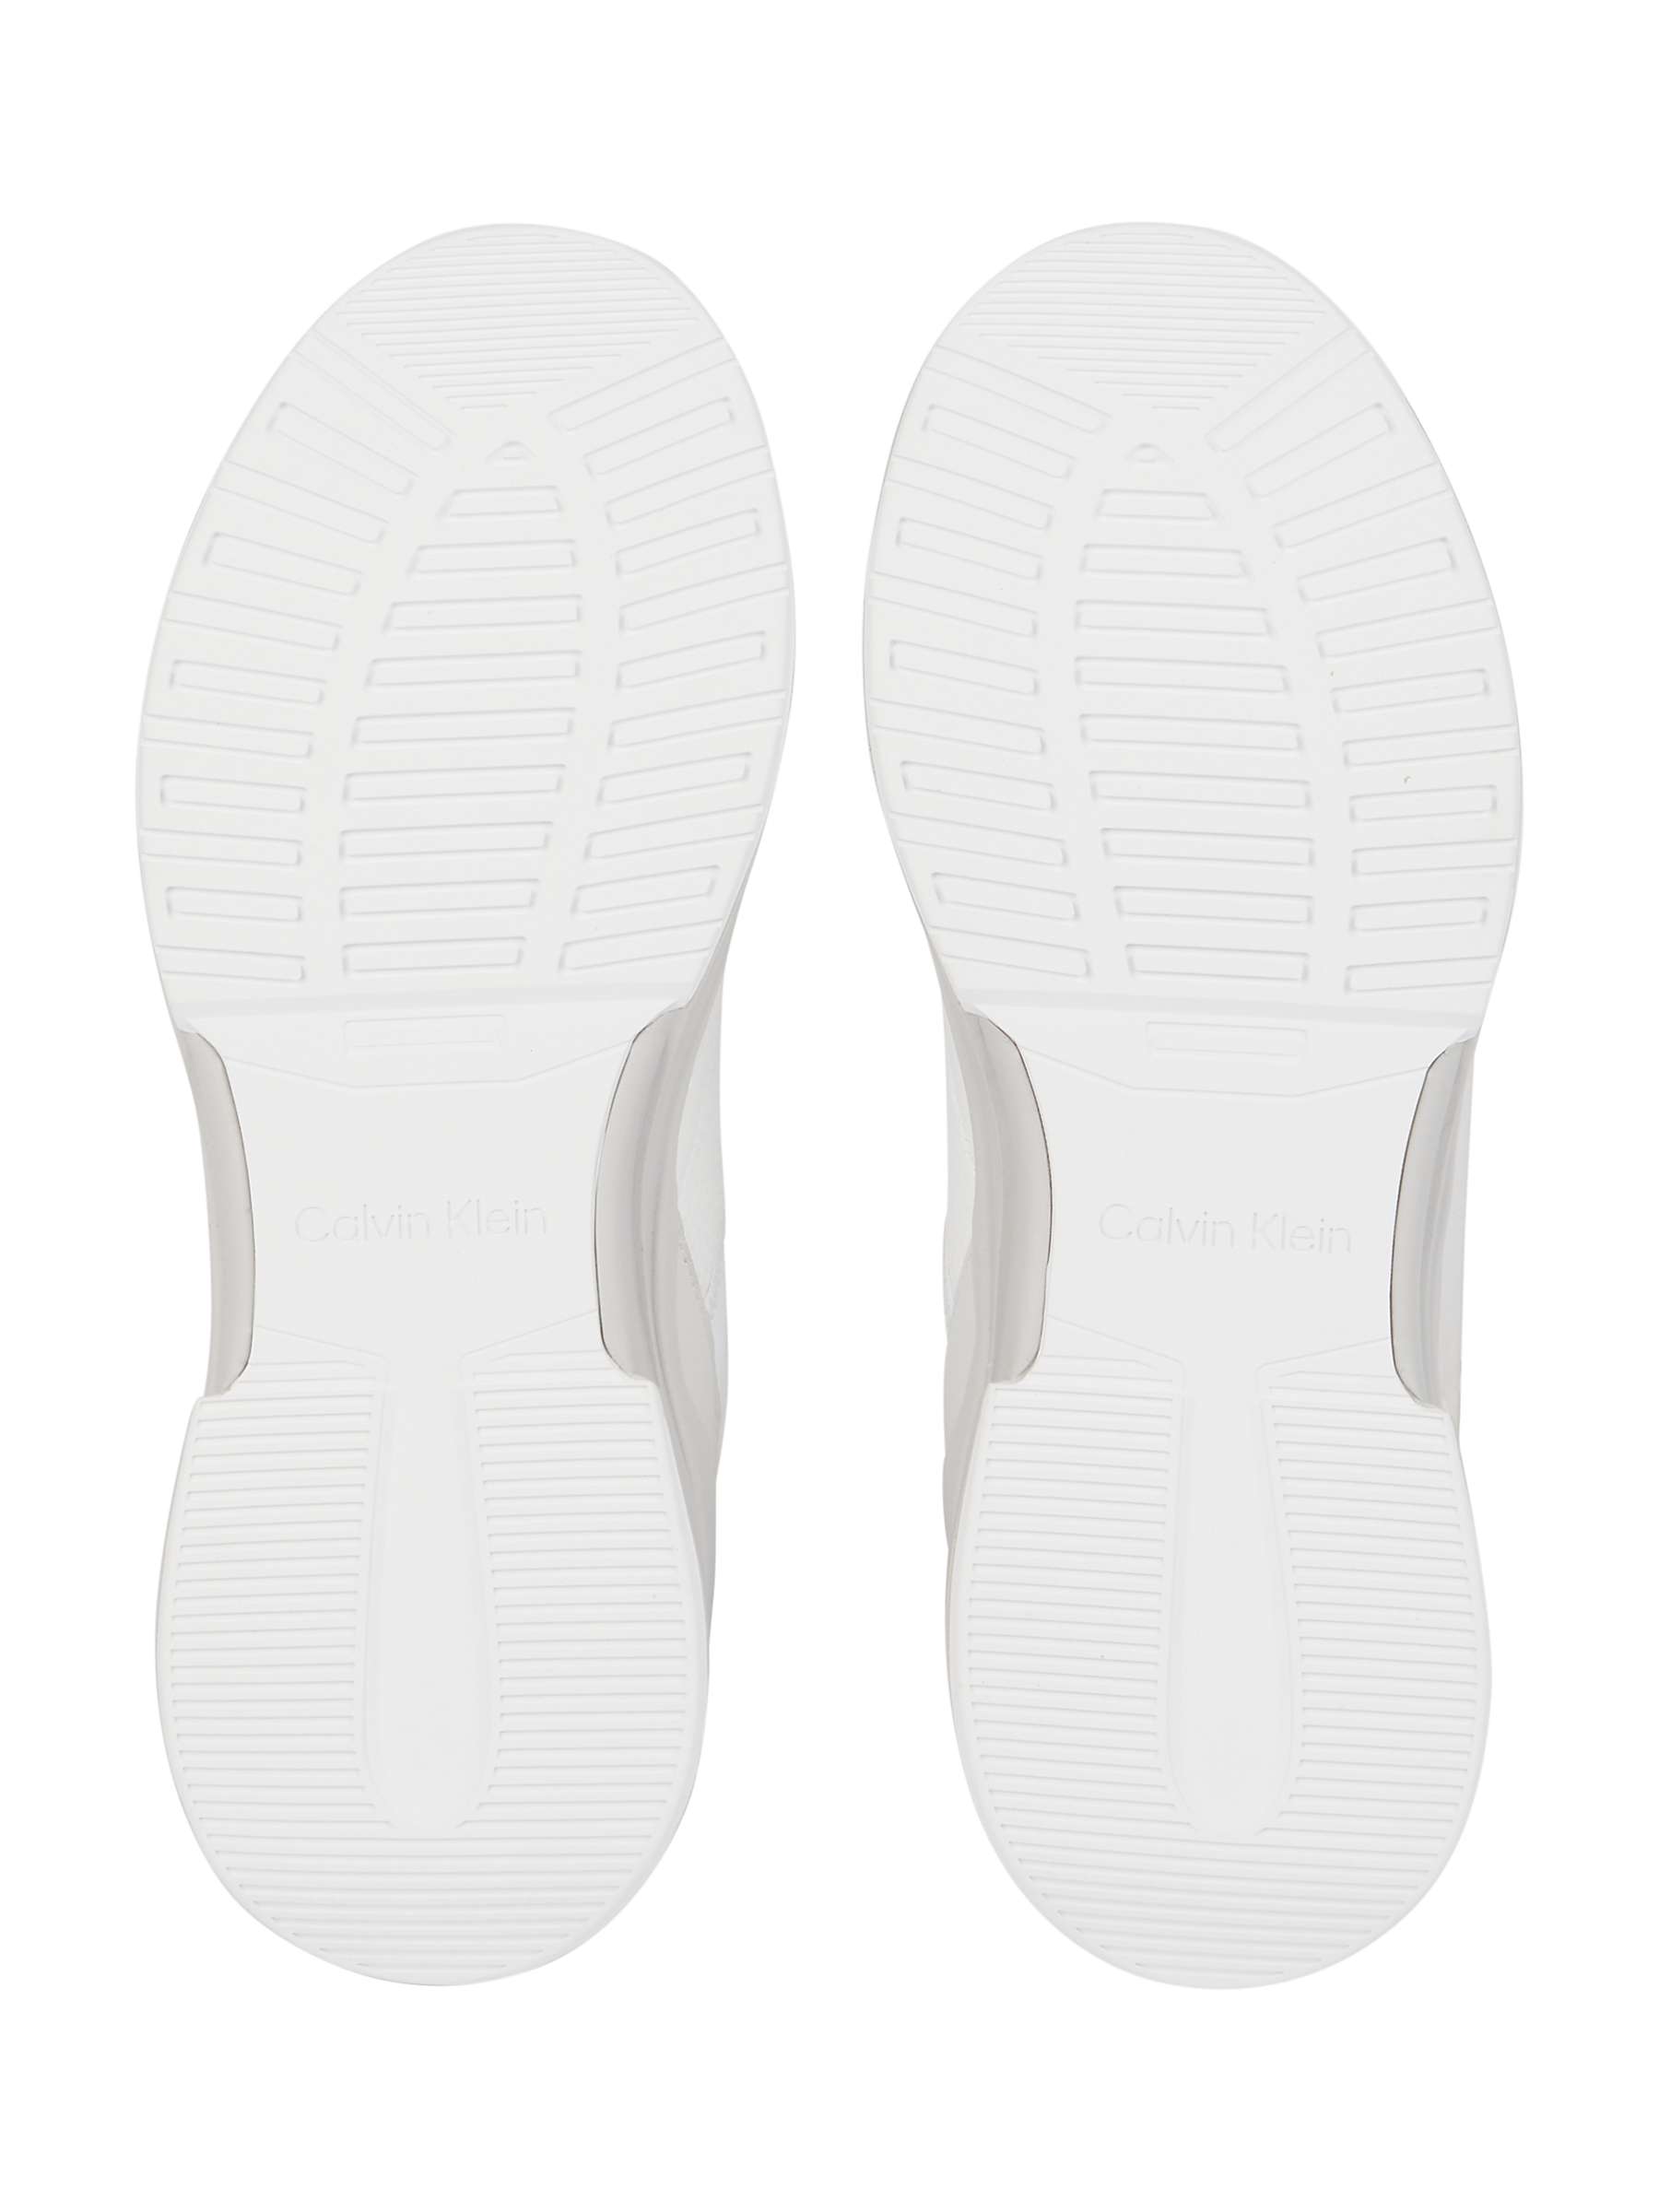 Buy Calvin Klein Leather Low Top Chunky Heel Trainers, White/Light Grey Online at johnlewis.com